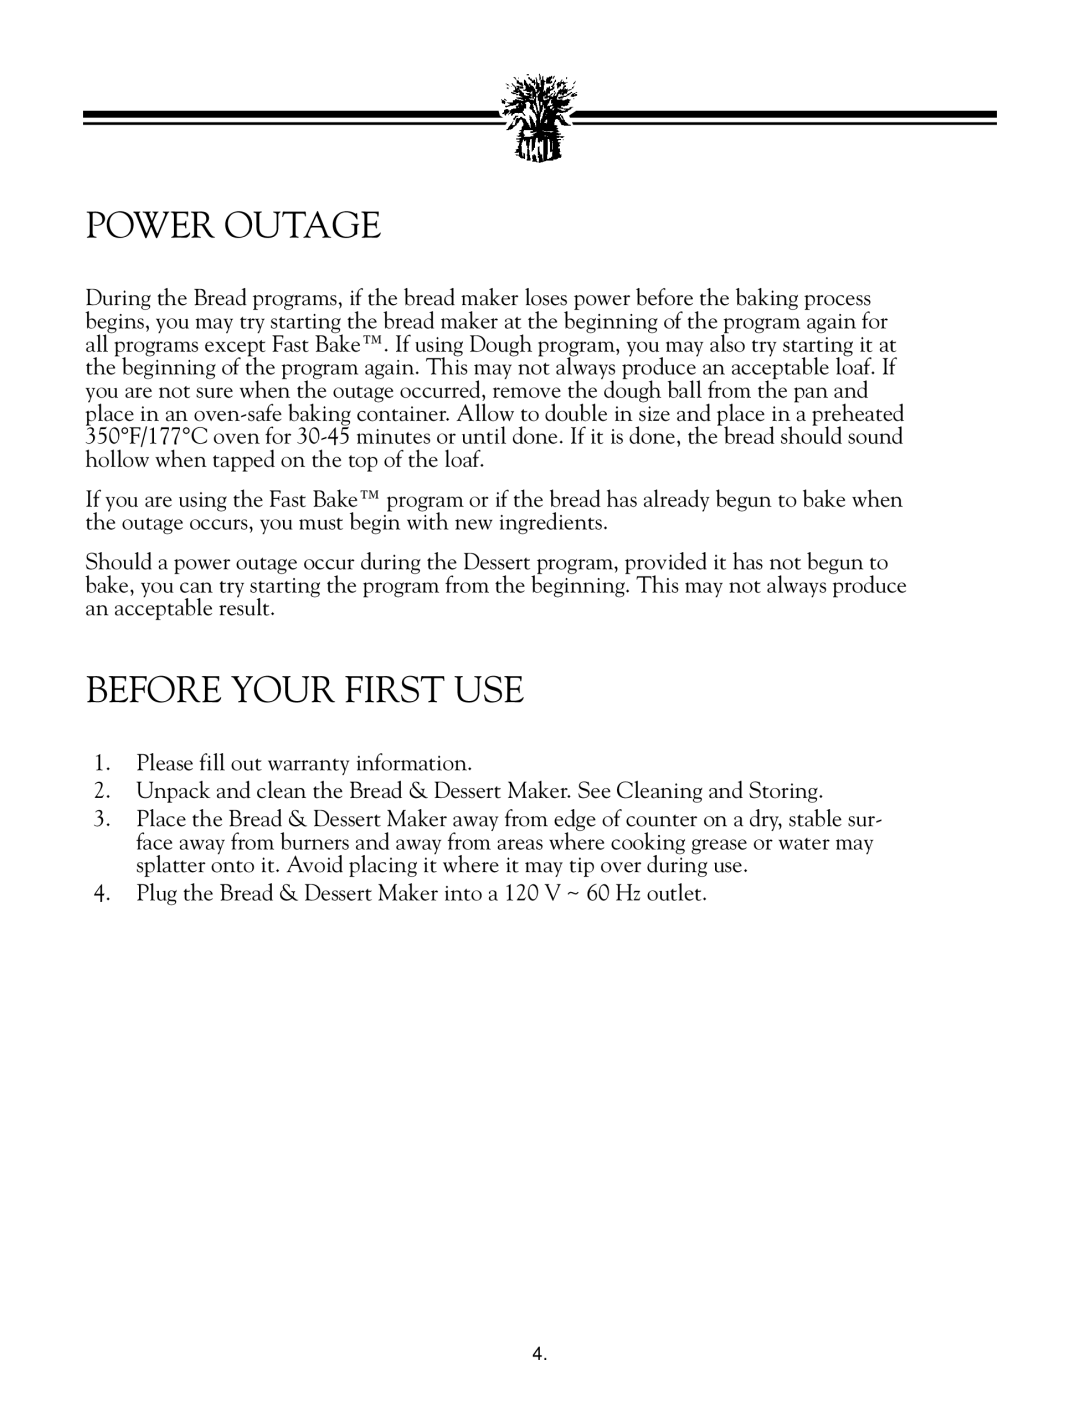 Breadman TR888 instruction manual Power Outage, Before Your First Use 